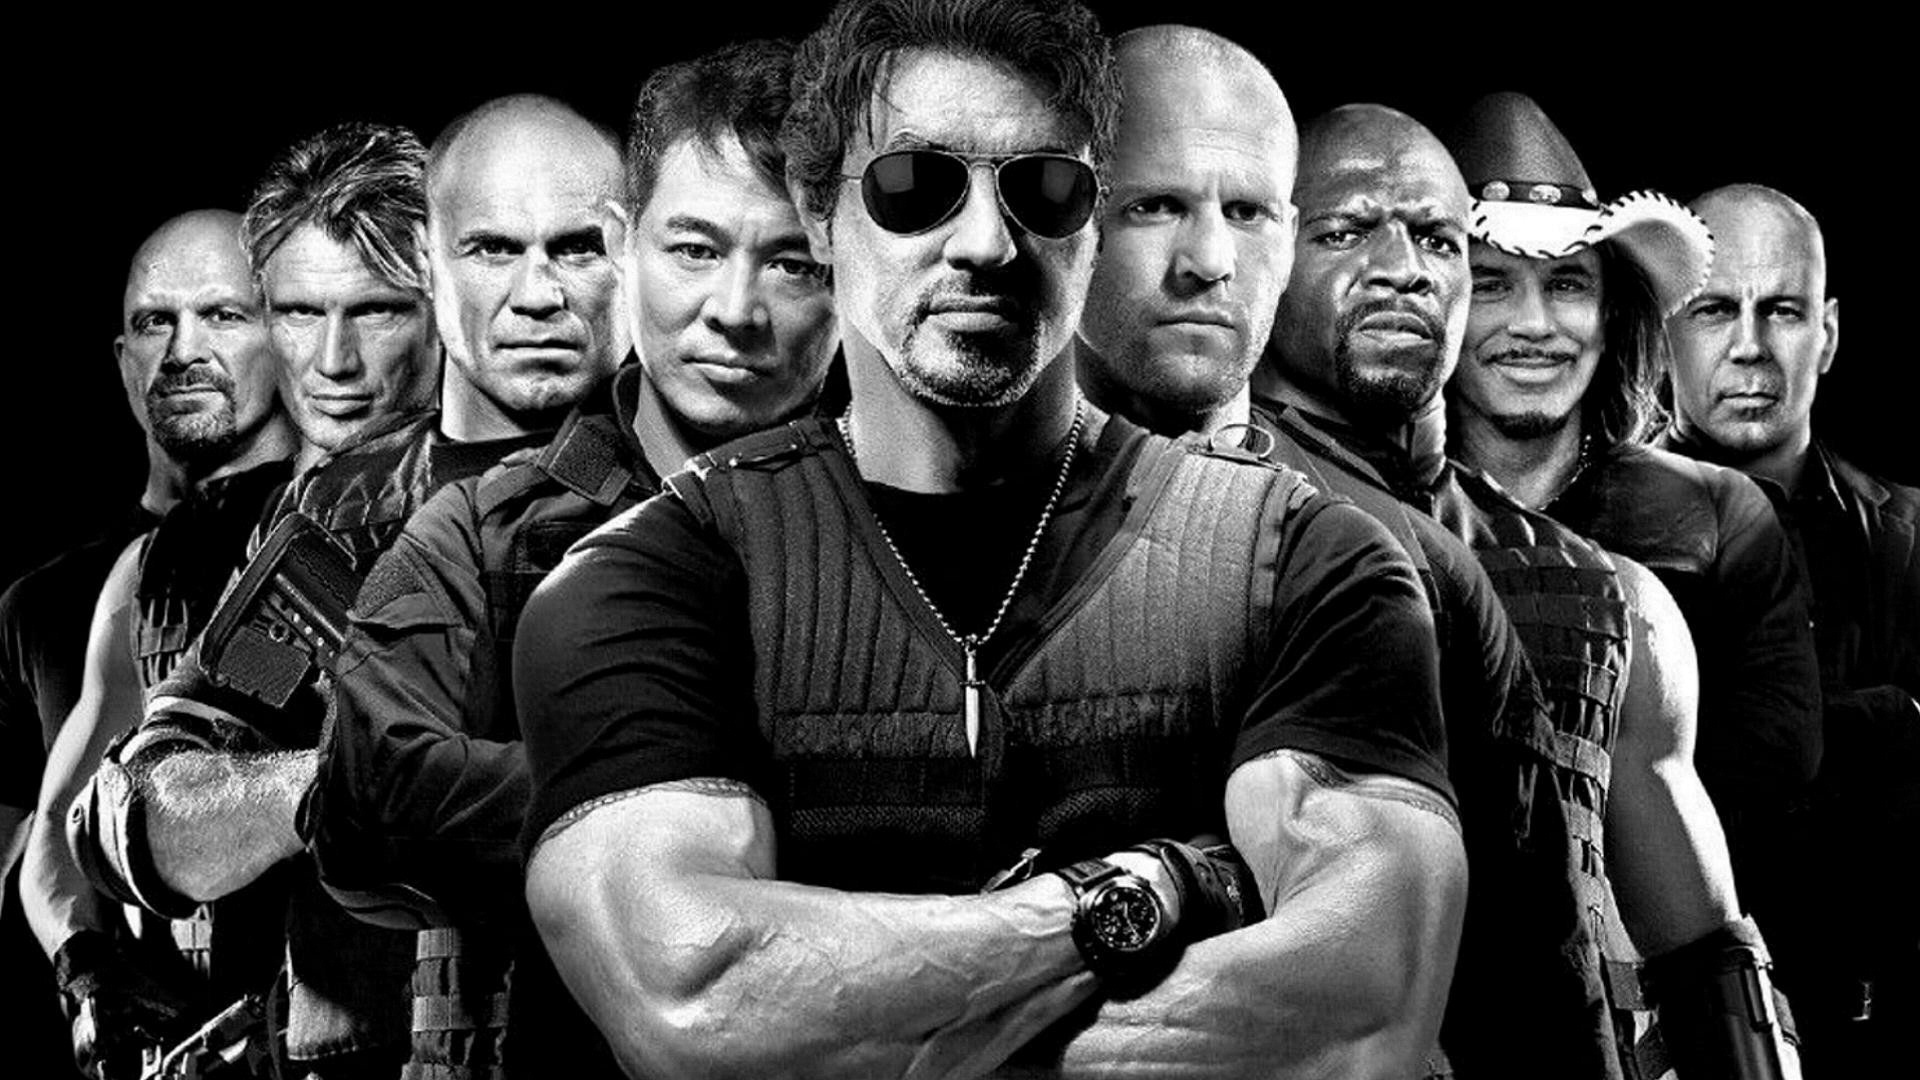 The Expendables - Expendables 2010 - HD Wallpaper 